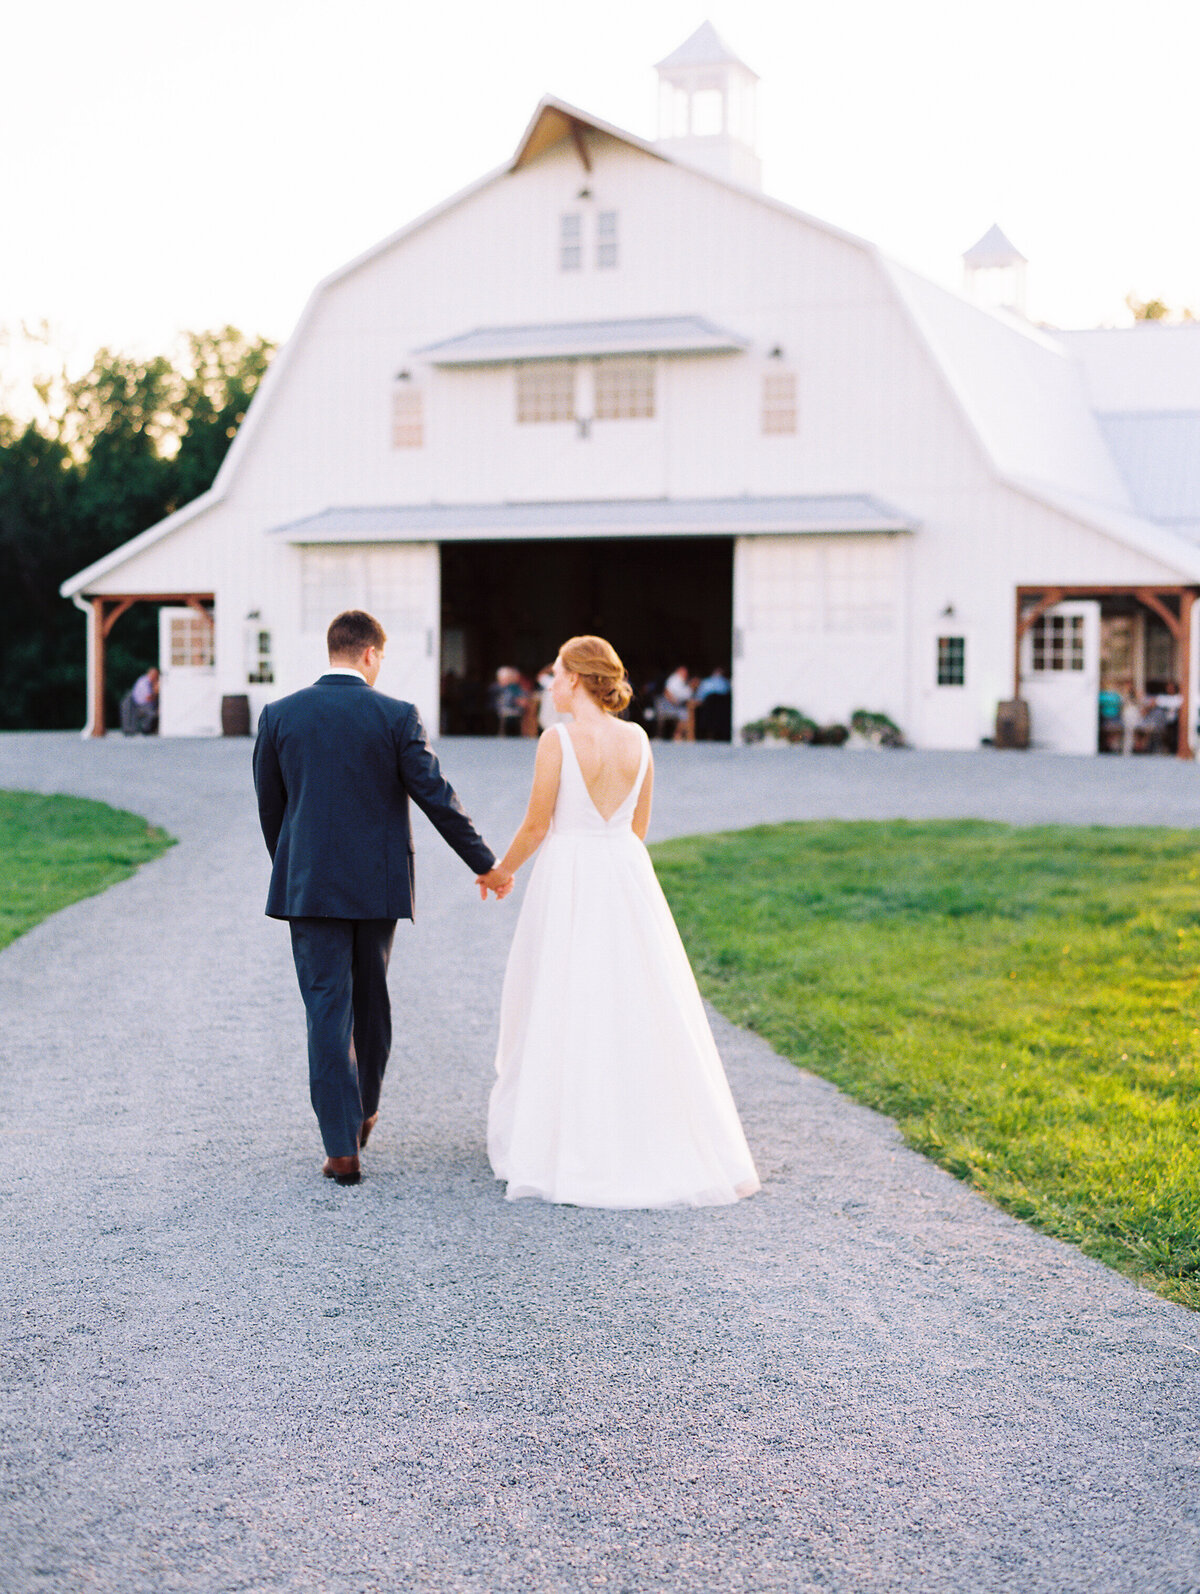 Bride and groom holding hands and walking toward the Groom in a pink jacket and bride in an elegant dress posing for a portrait at Wildflower On Watts white barn venue